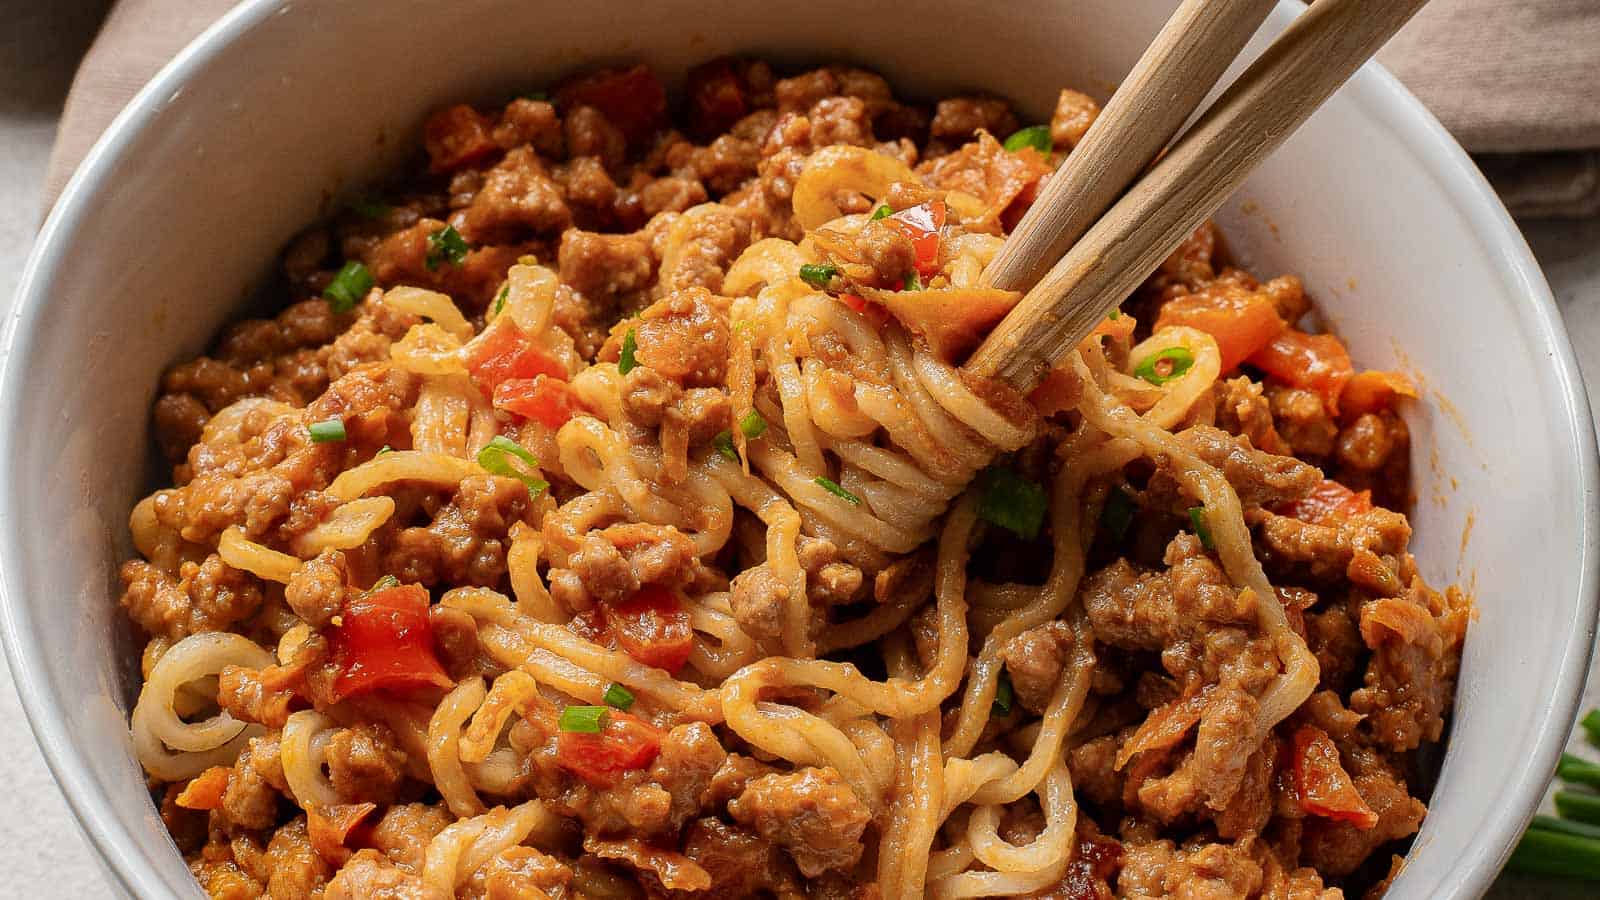 A bowl of noodles with meat sauce garnished with herbs, with a fork twirling some noodles.